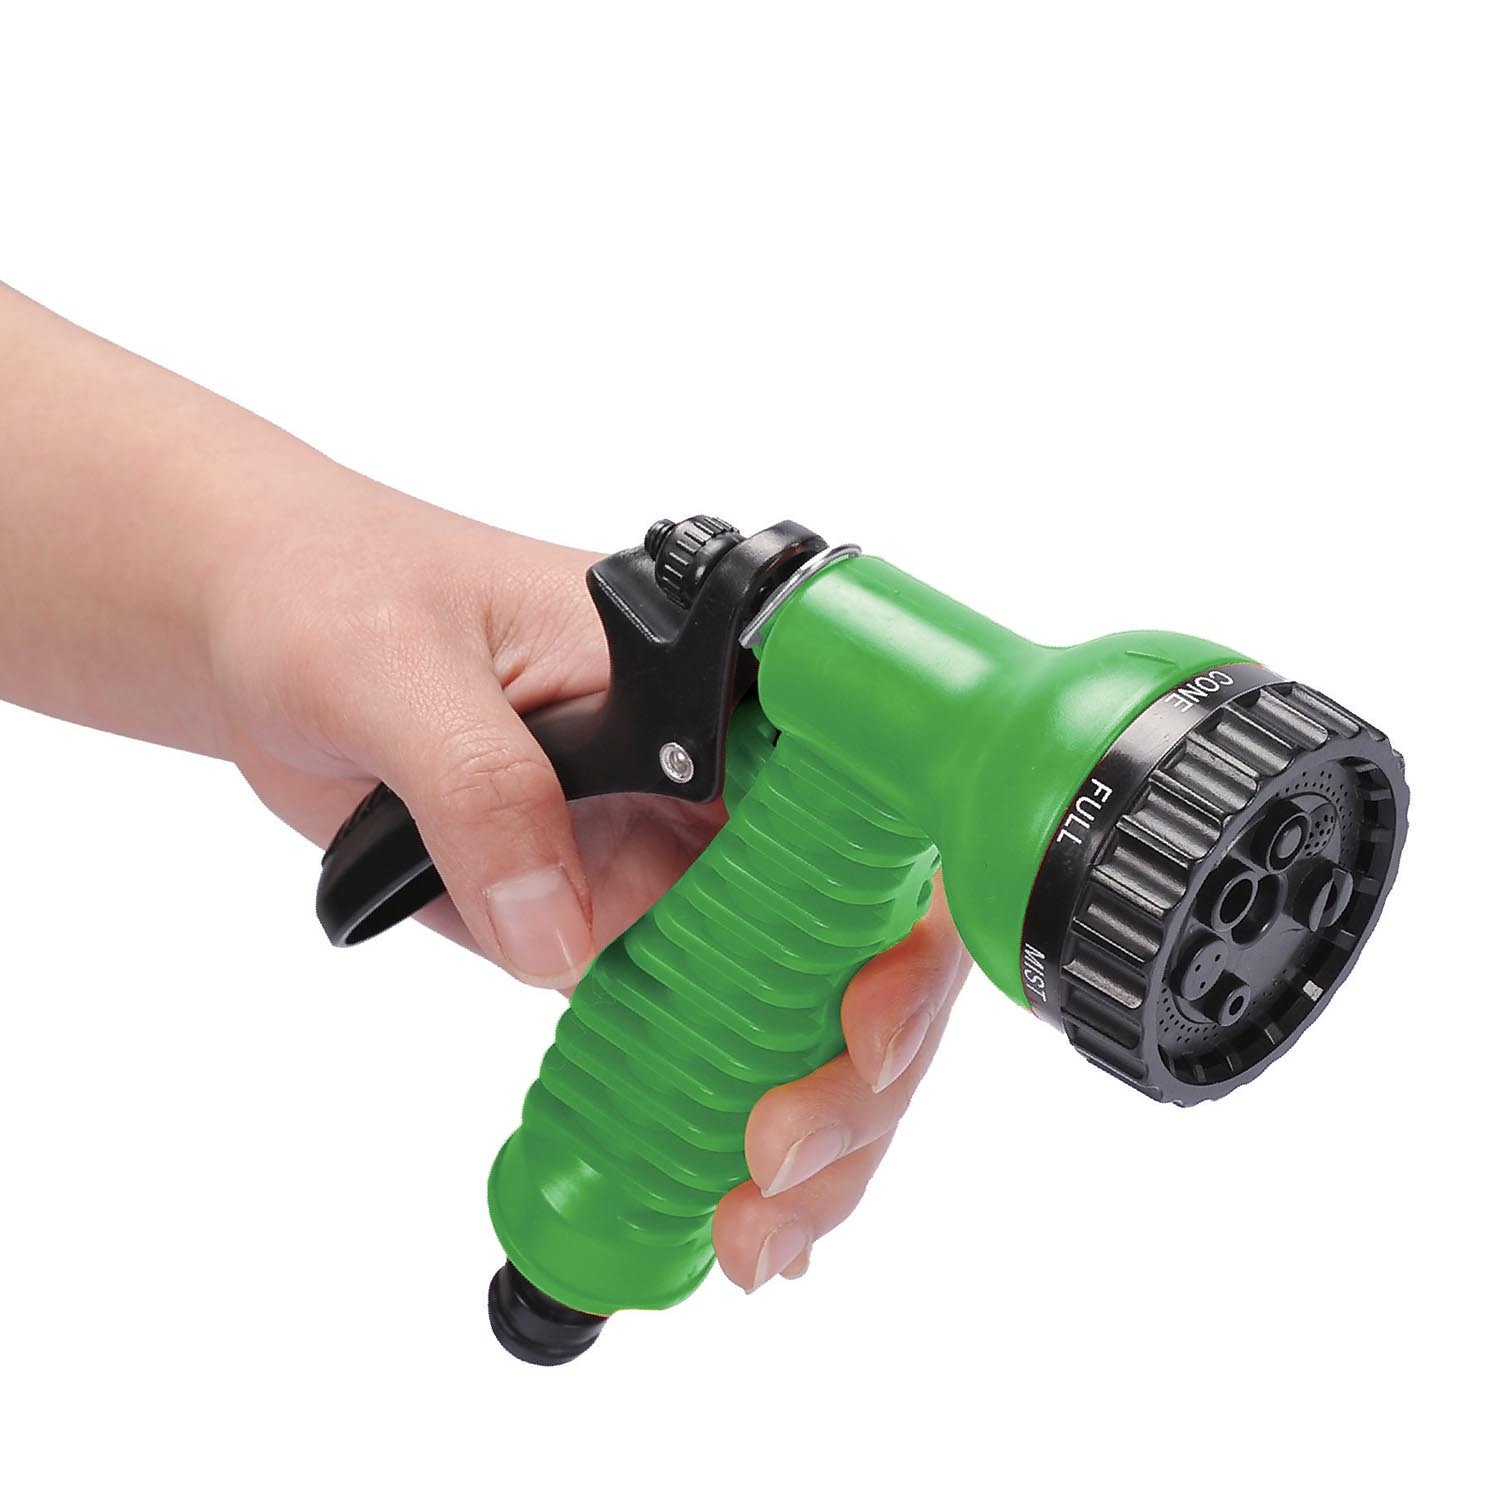 Expandable 100ft Kink Free Hose with Spray Gun Image 3